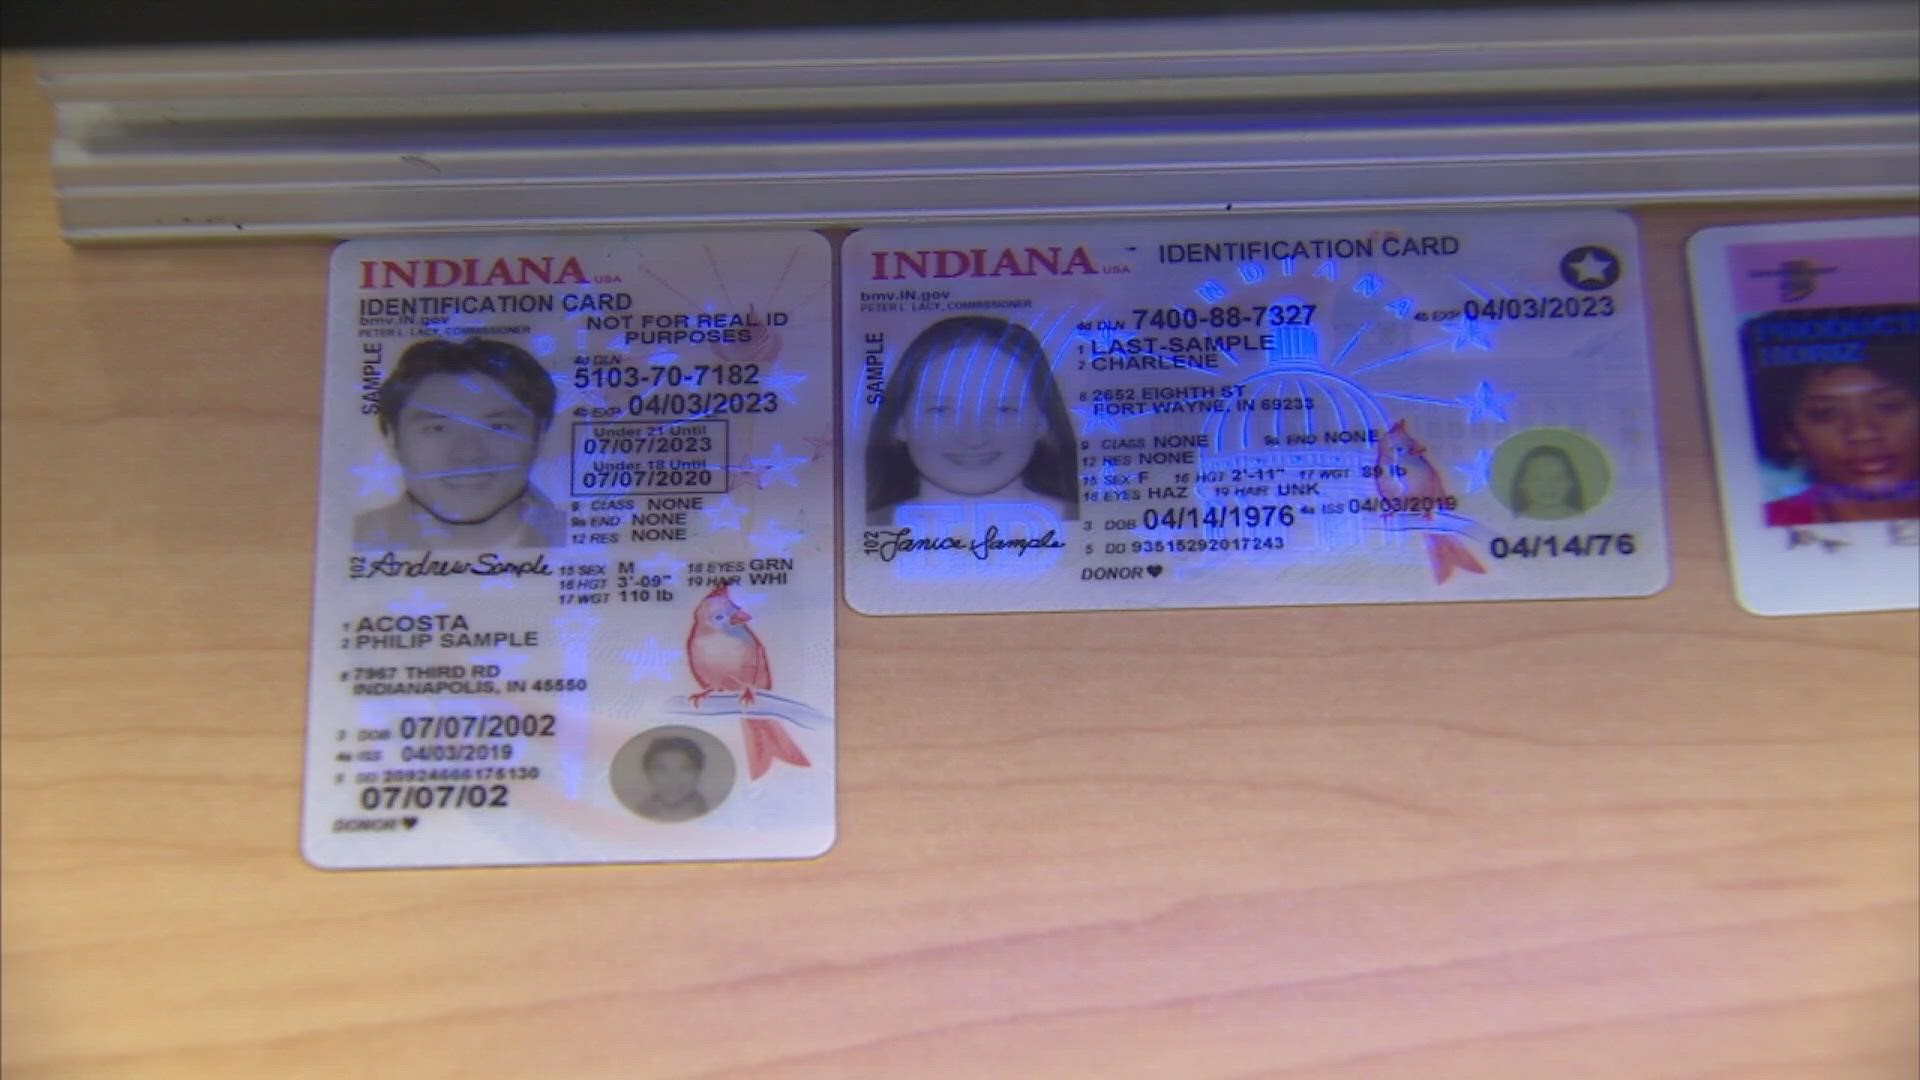 A proposal to give driving privileges cards to undocumented immigrants in Indiana was passed out of committee.